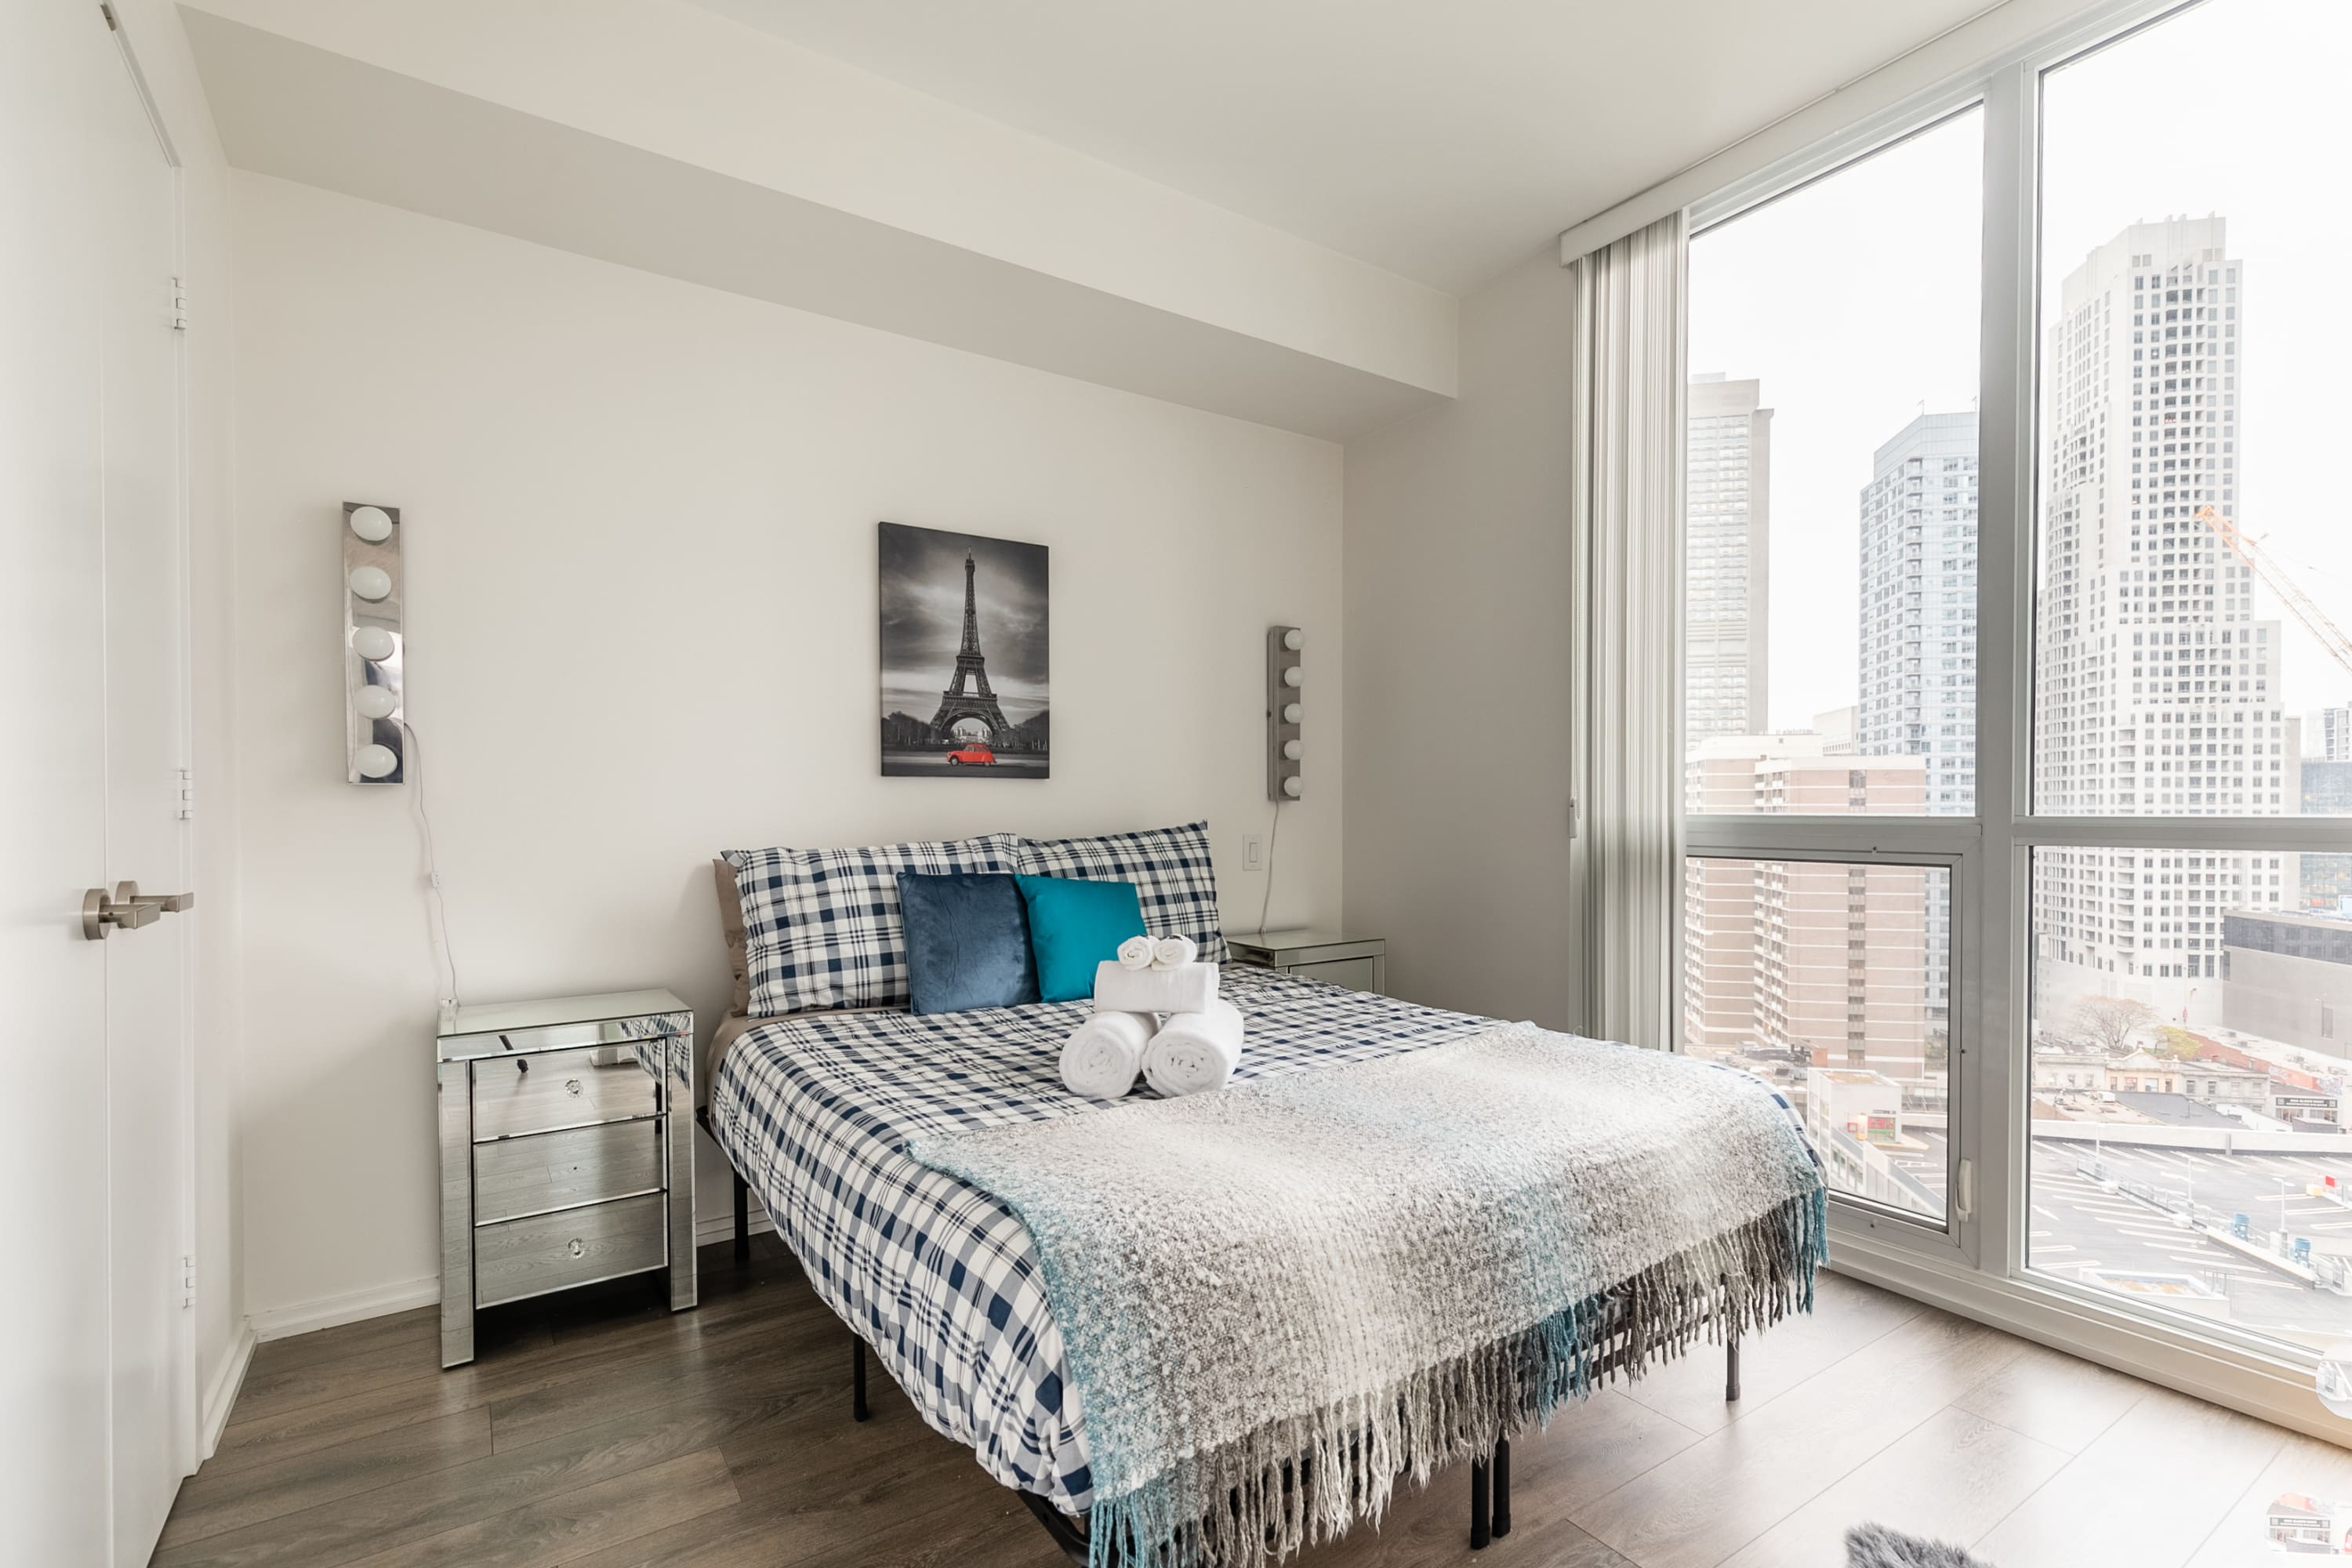 Property Image 2 - Bright & Airy 1BR Condo, heart of DT Toronto!